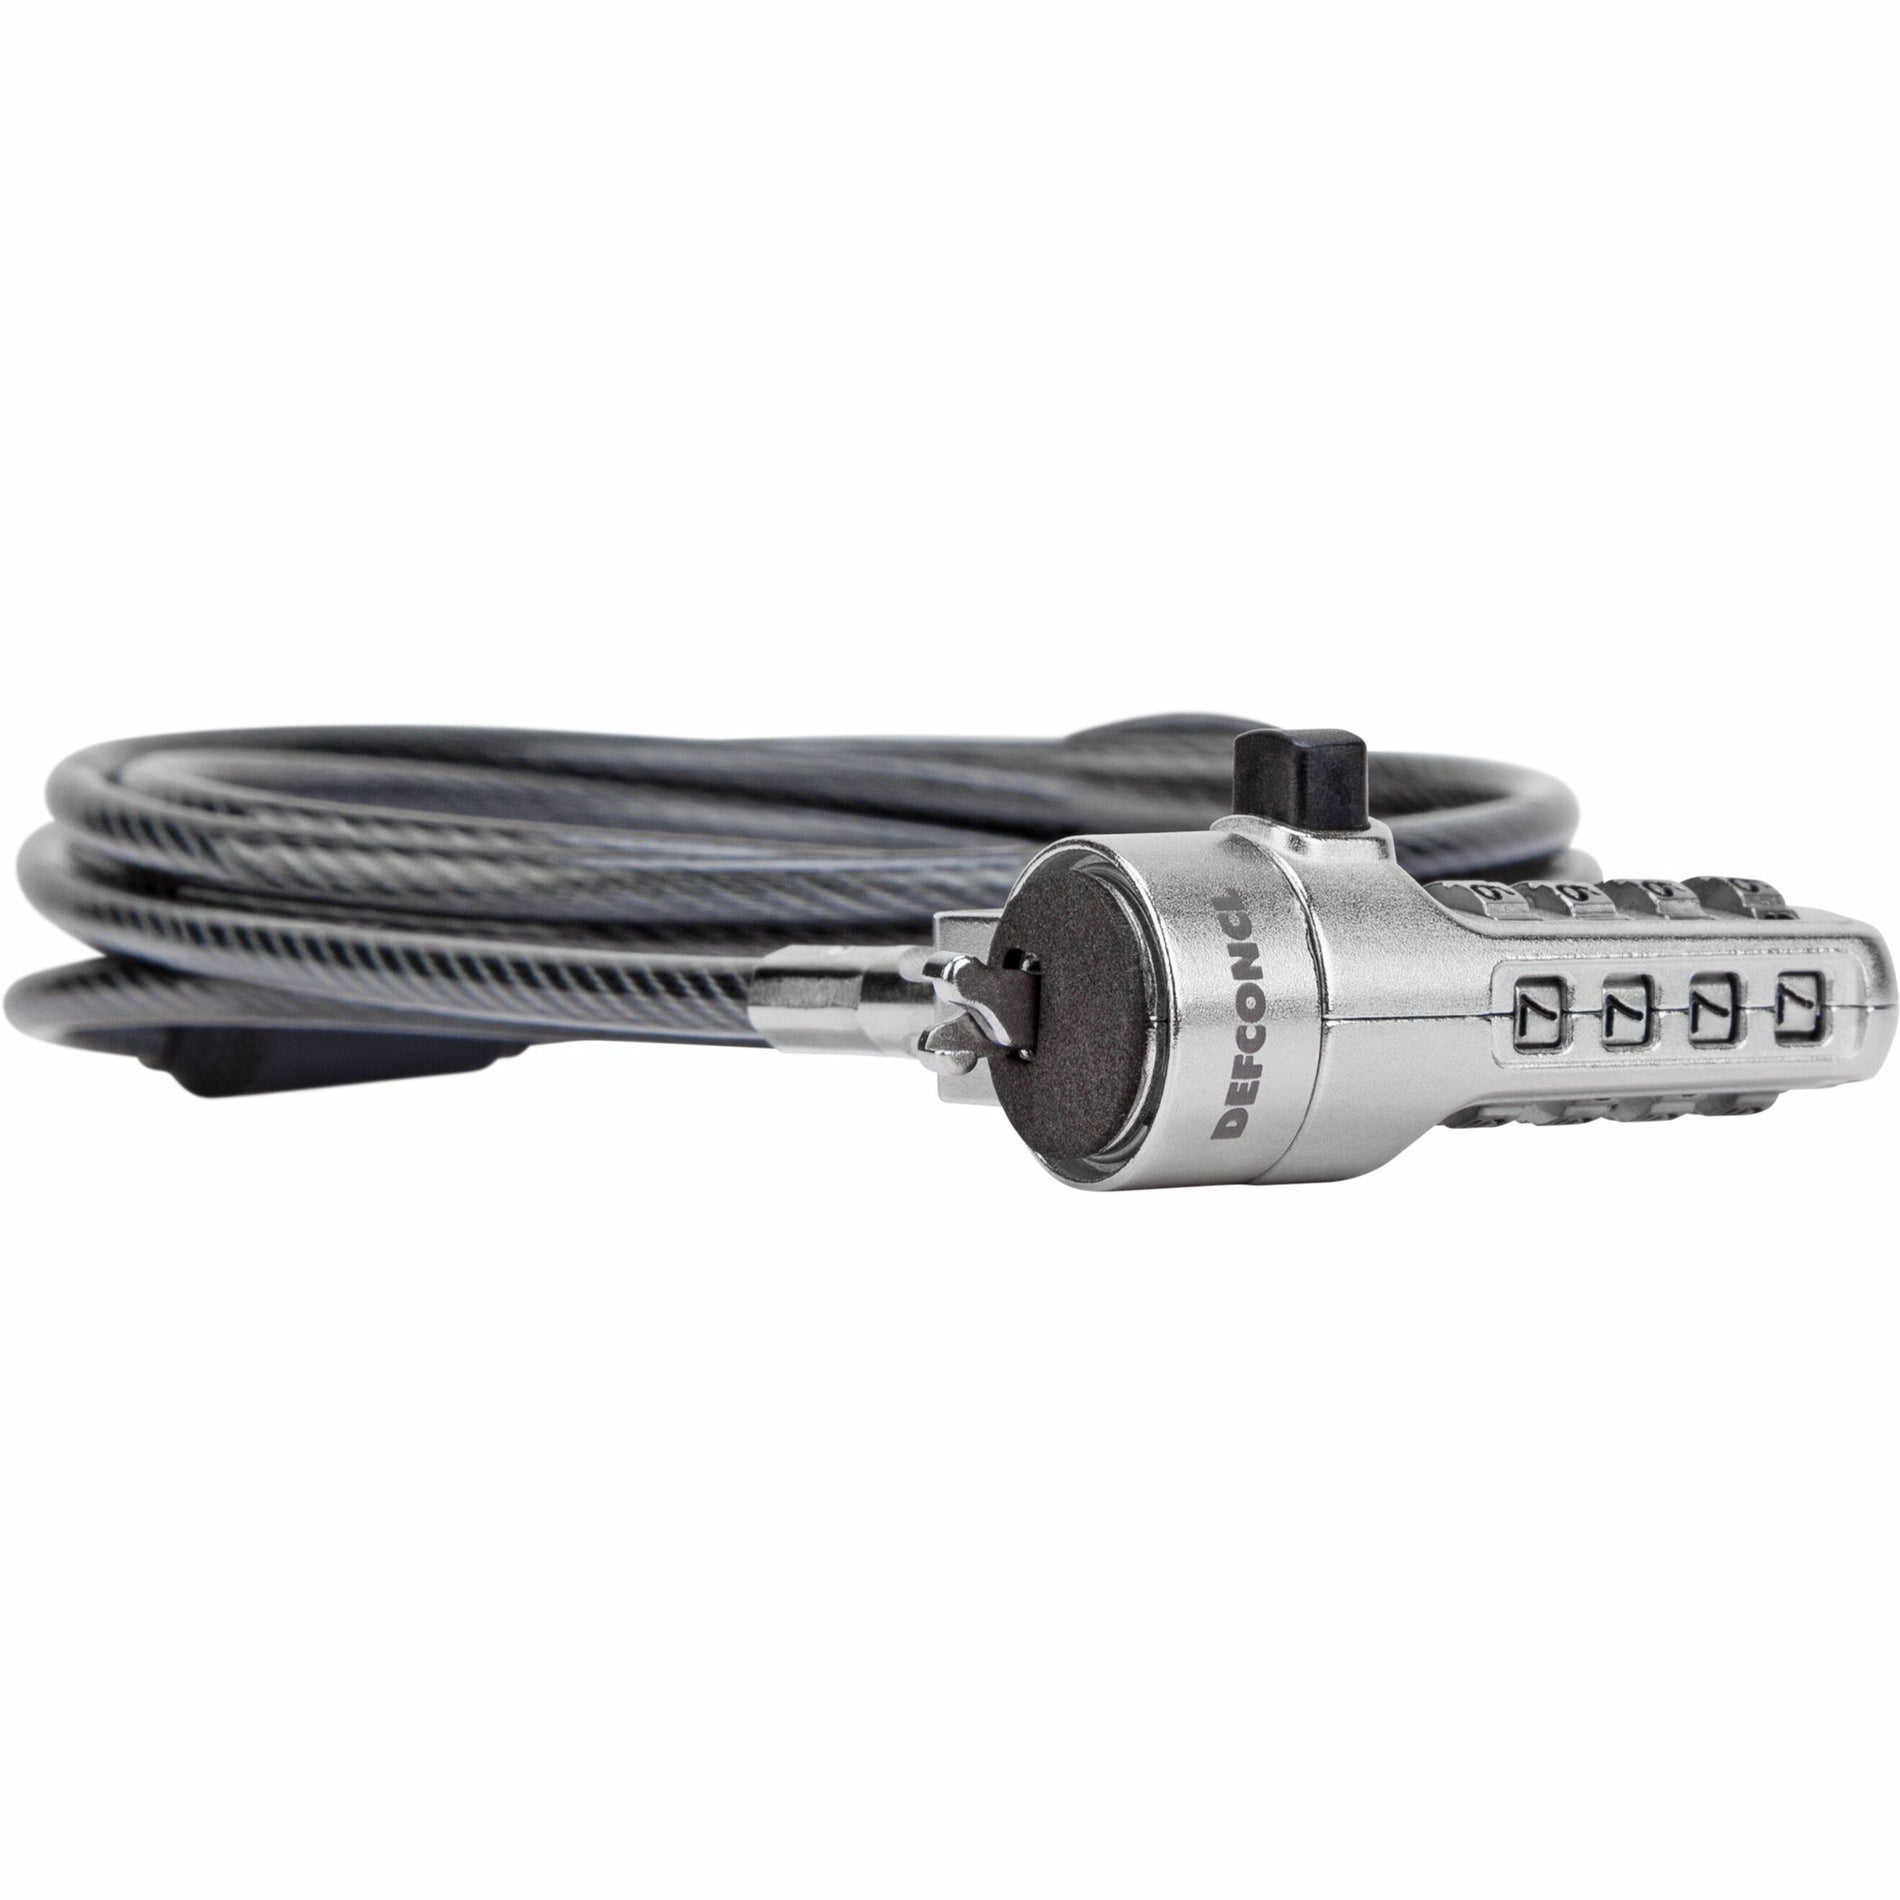 Targus ASP66GLX DEFCON Cable Lock, Combination Lock, 6.50 ft Cable Length, Resettable